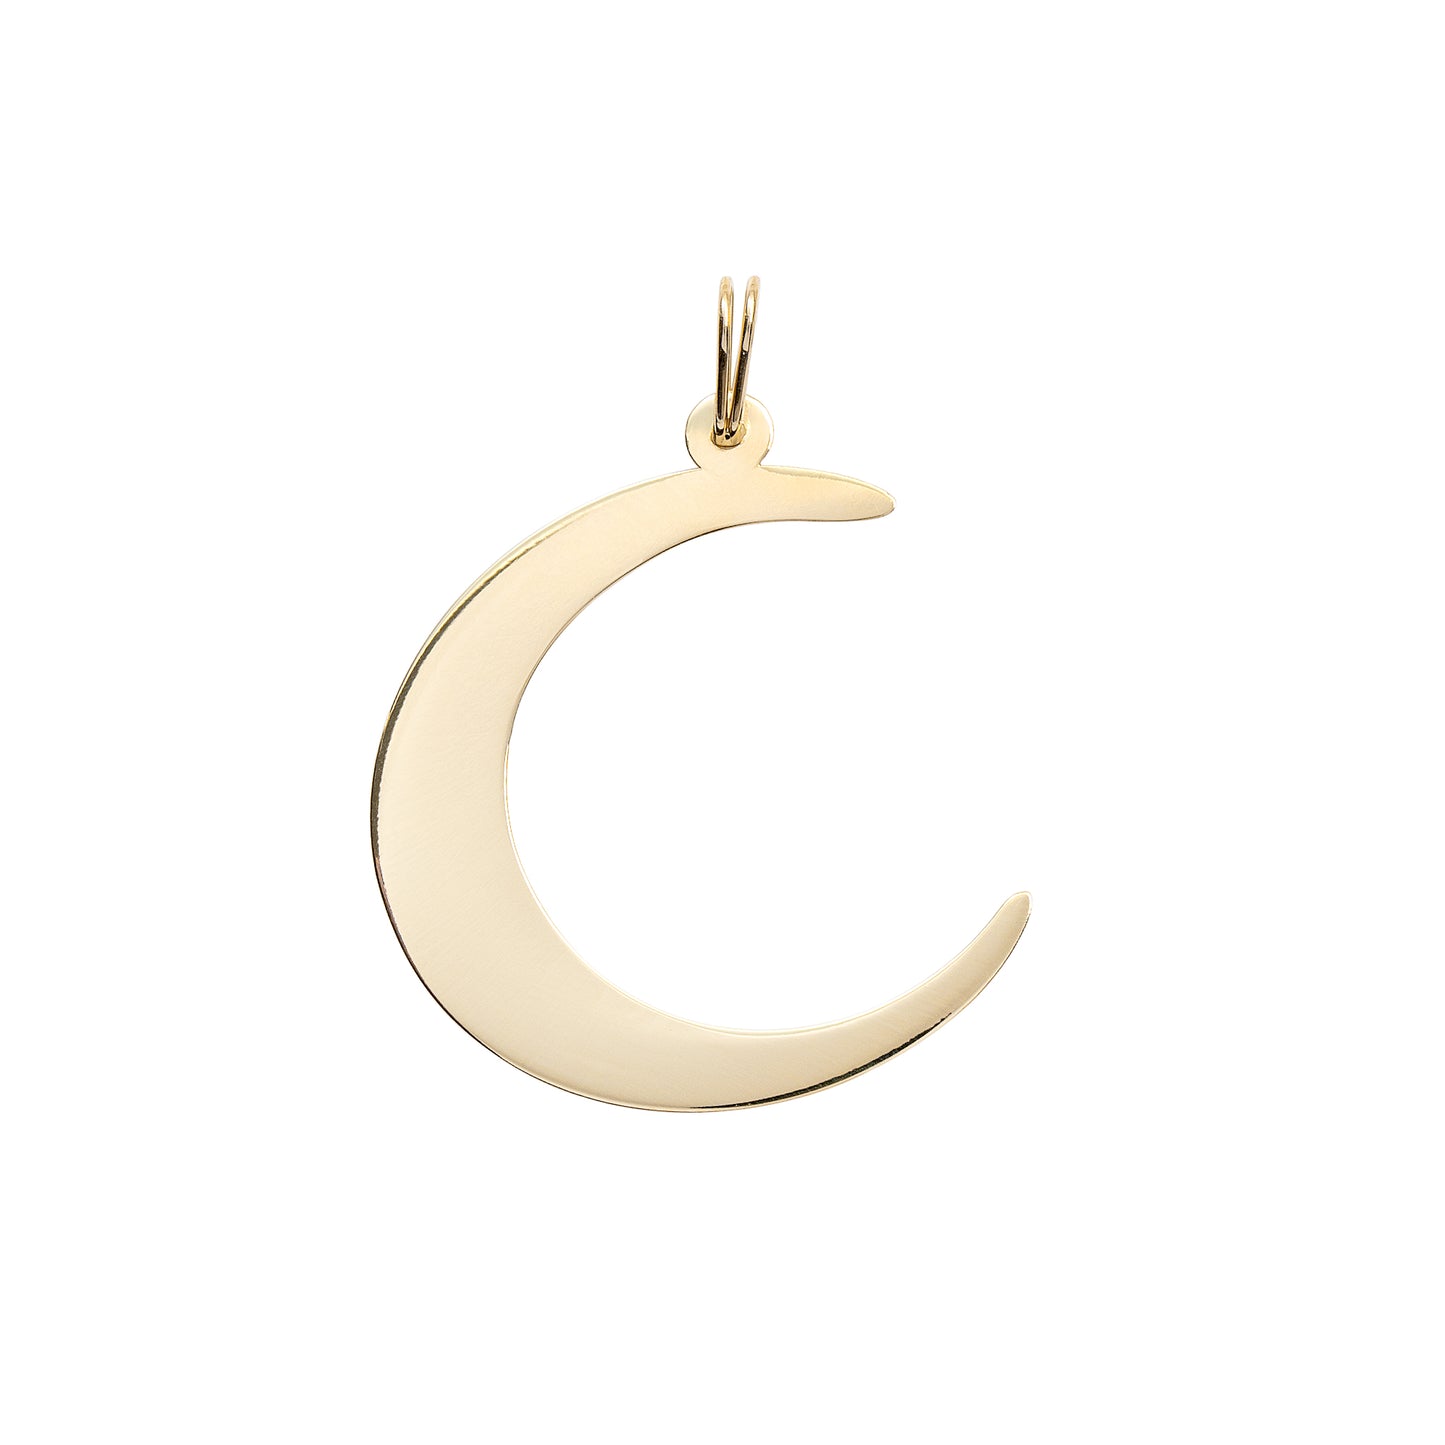 The Moon Necklace